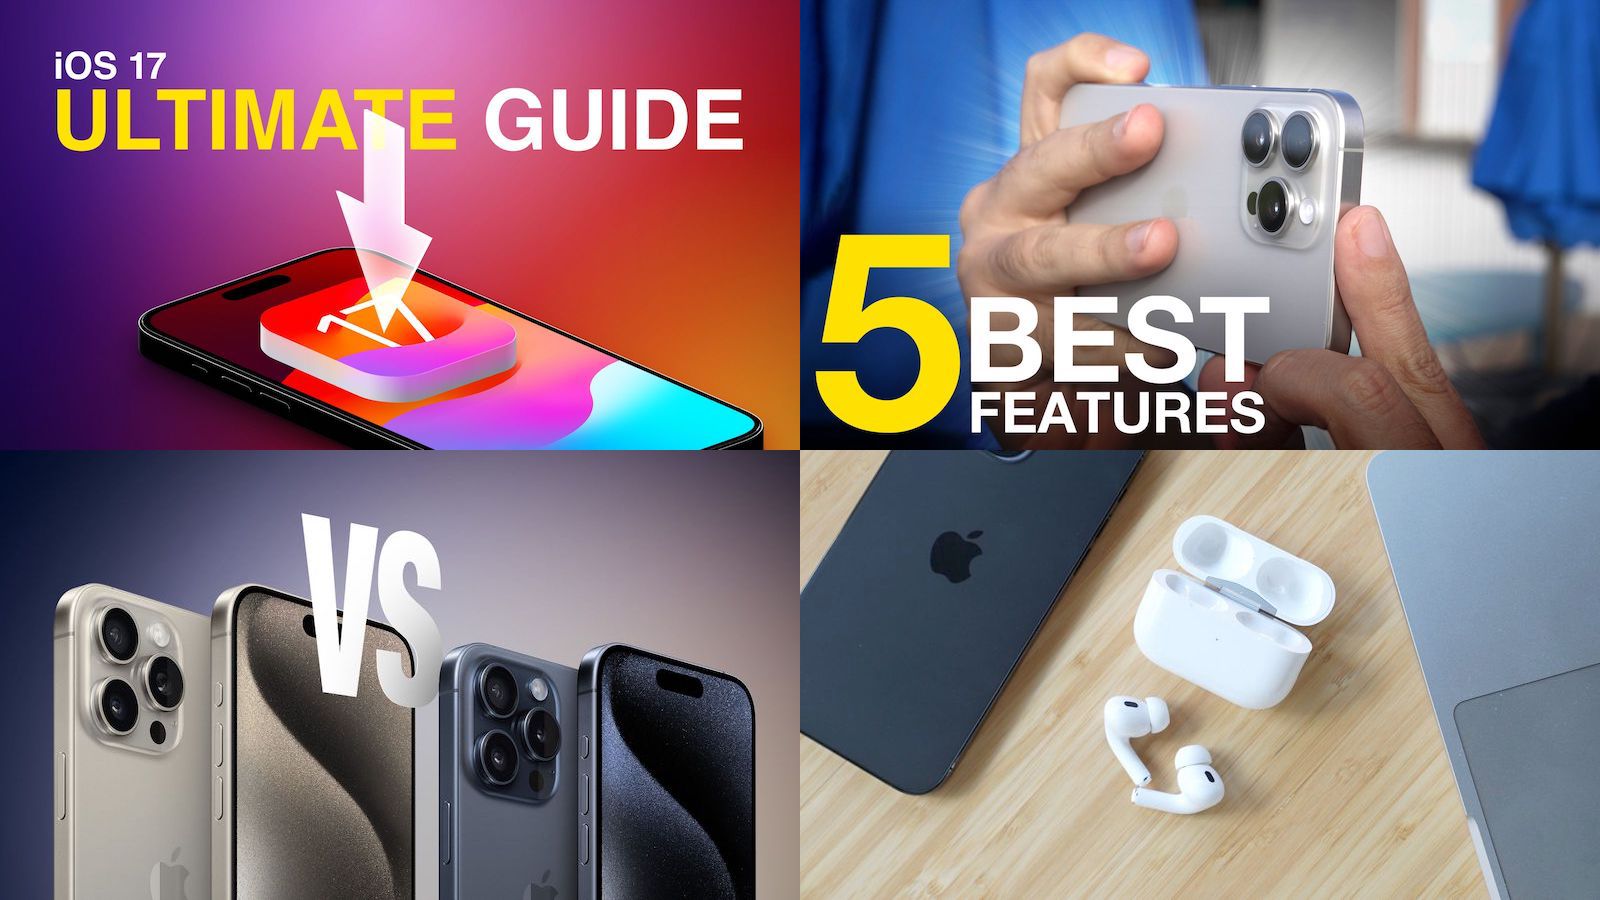 Top Stories: iOS 17, iPhone 15, and New Apple Watches Released